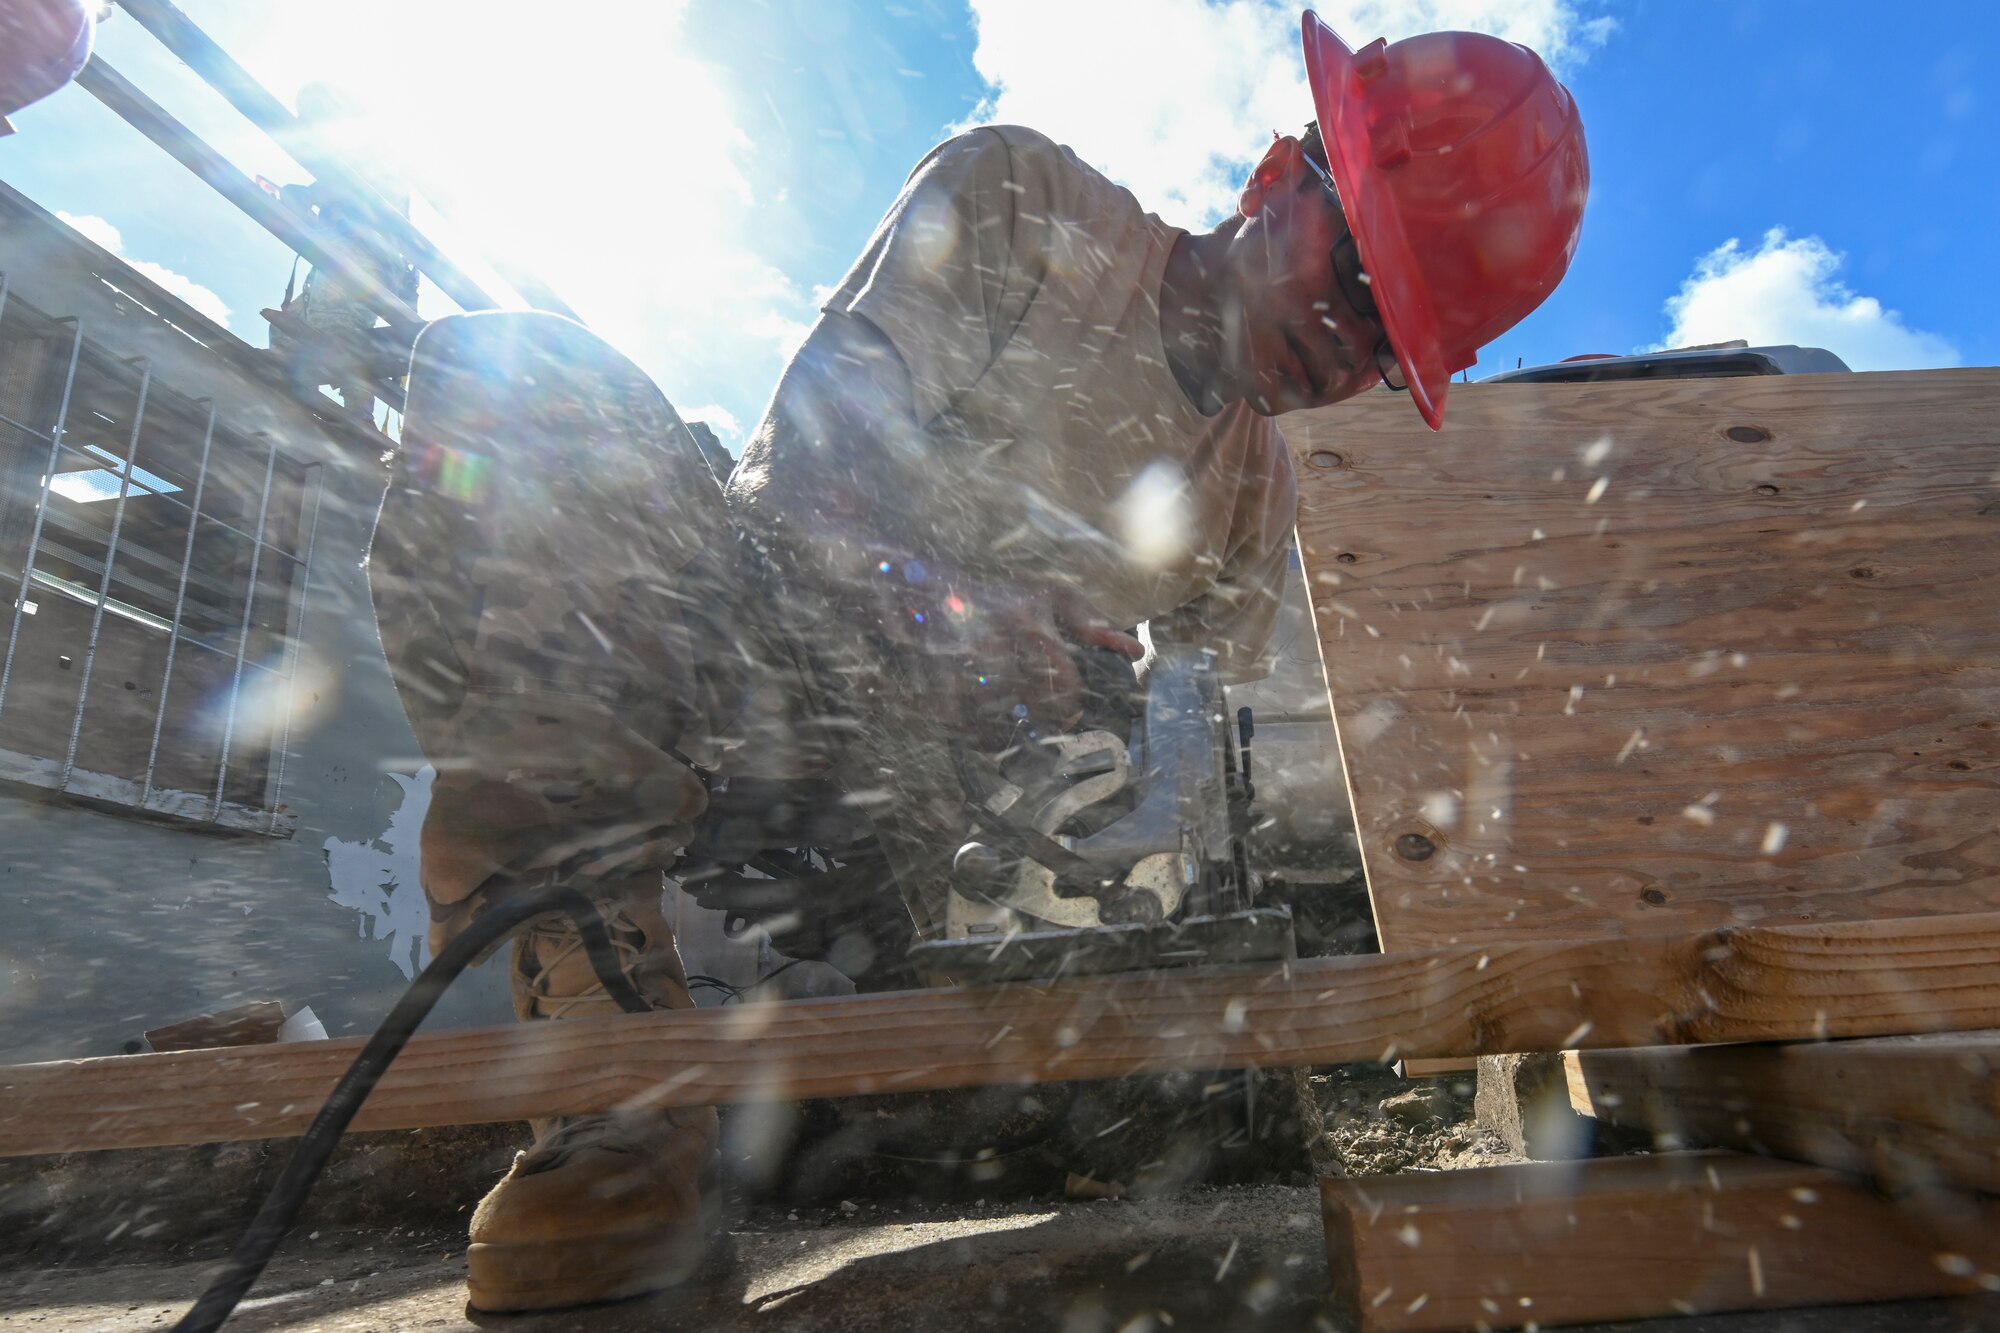 Staff Sgt. Pete Taijeron, 254th Rapid Engineer Deployable Heavy Operational Repair Squadron Engineers, uses a circular saw to cut a piece of 2x4 that will be used to help build a roof for a home in the village of Koblerville, Saipan, Commonwealth of the Northern Mariana Islands, Nov. 20, 2018, as part of the roof building in support of the Super Typhoon Yutu relief efforts.